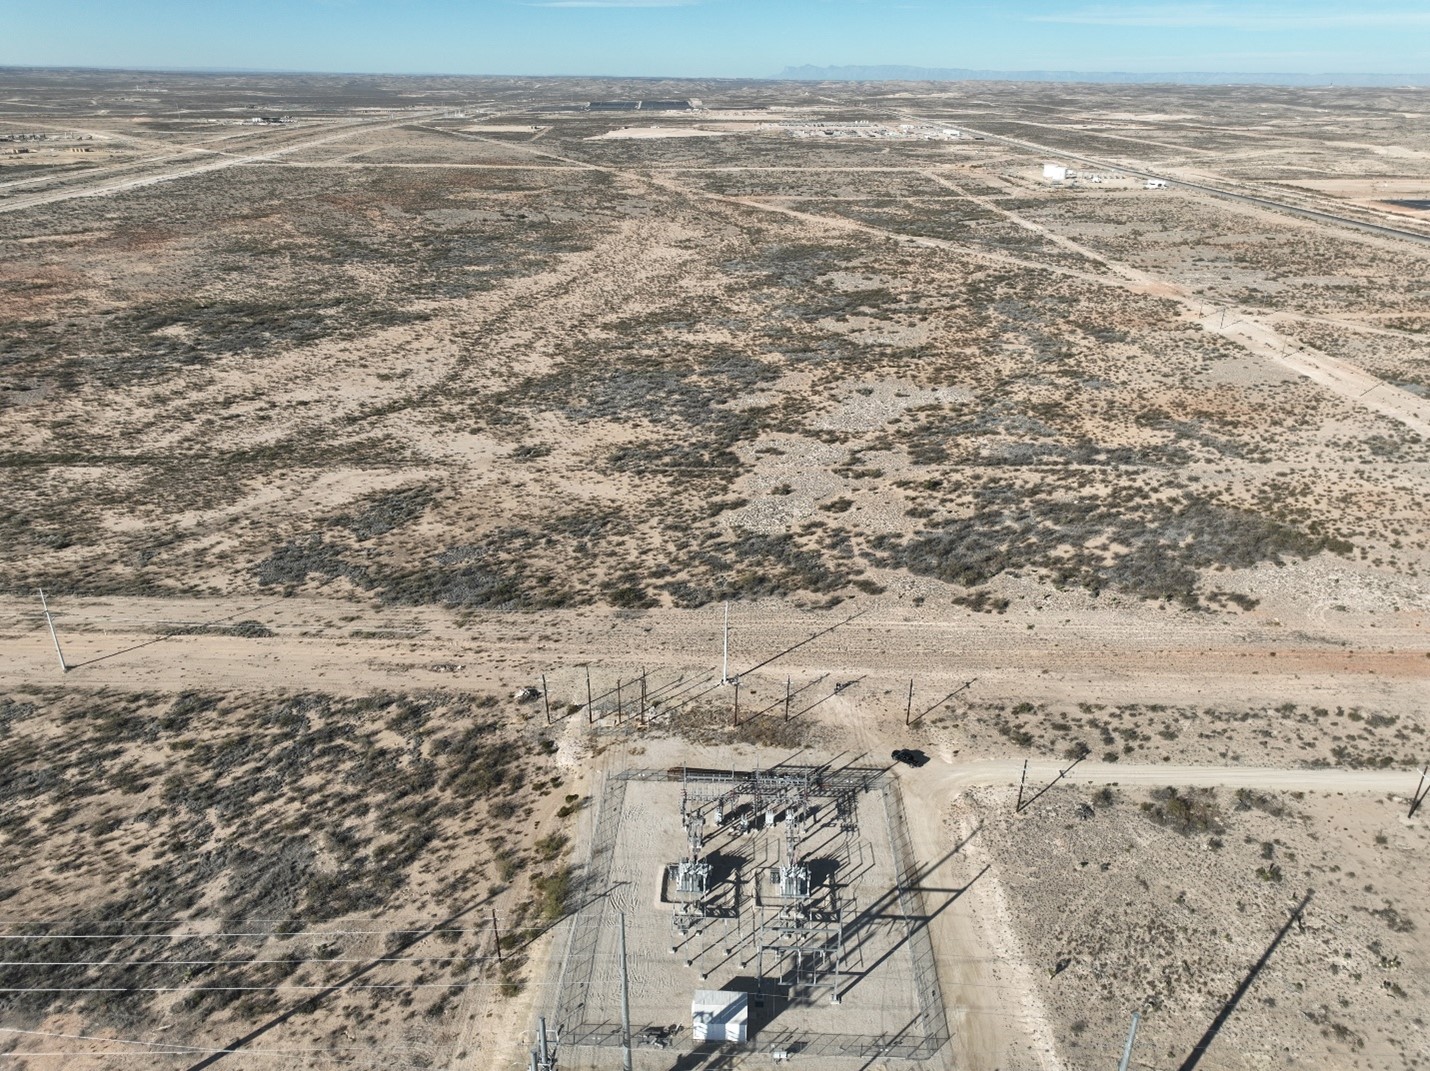 Hut 8 is building a new site in Culberson County, Texas for <percent>40%</percent> less than the cost of buying a turnkey site. Expected to come online in Q2, the site is expected to have up to 3.6 EH/s of self-mining capacity.